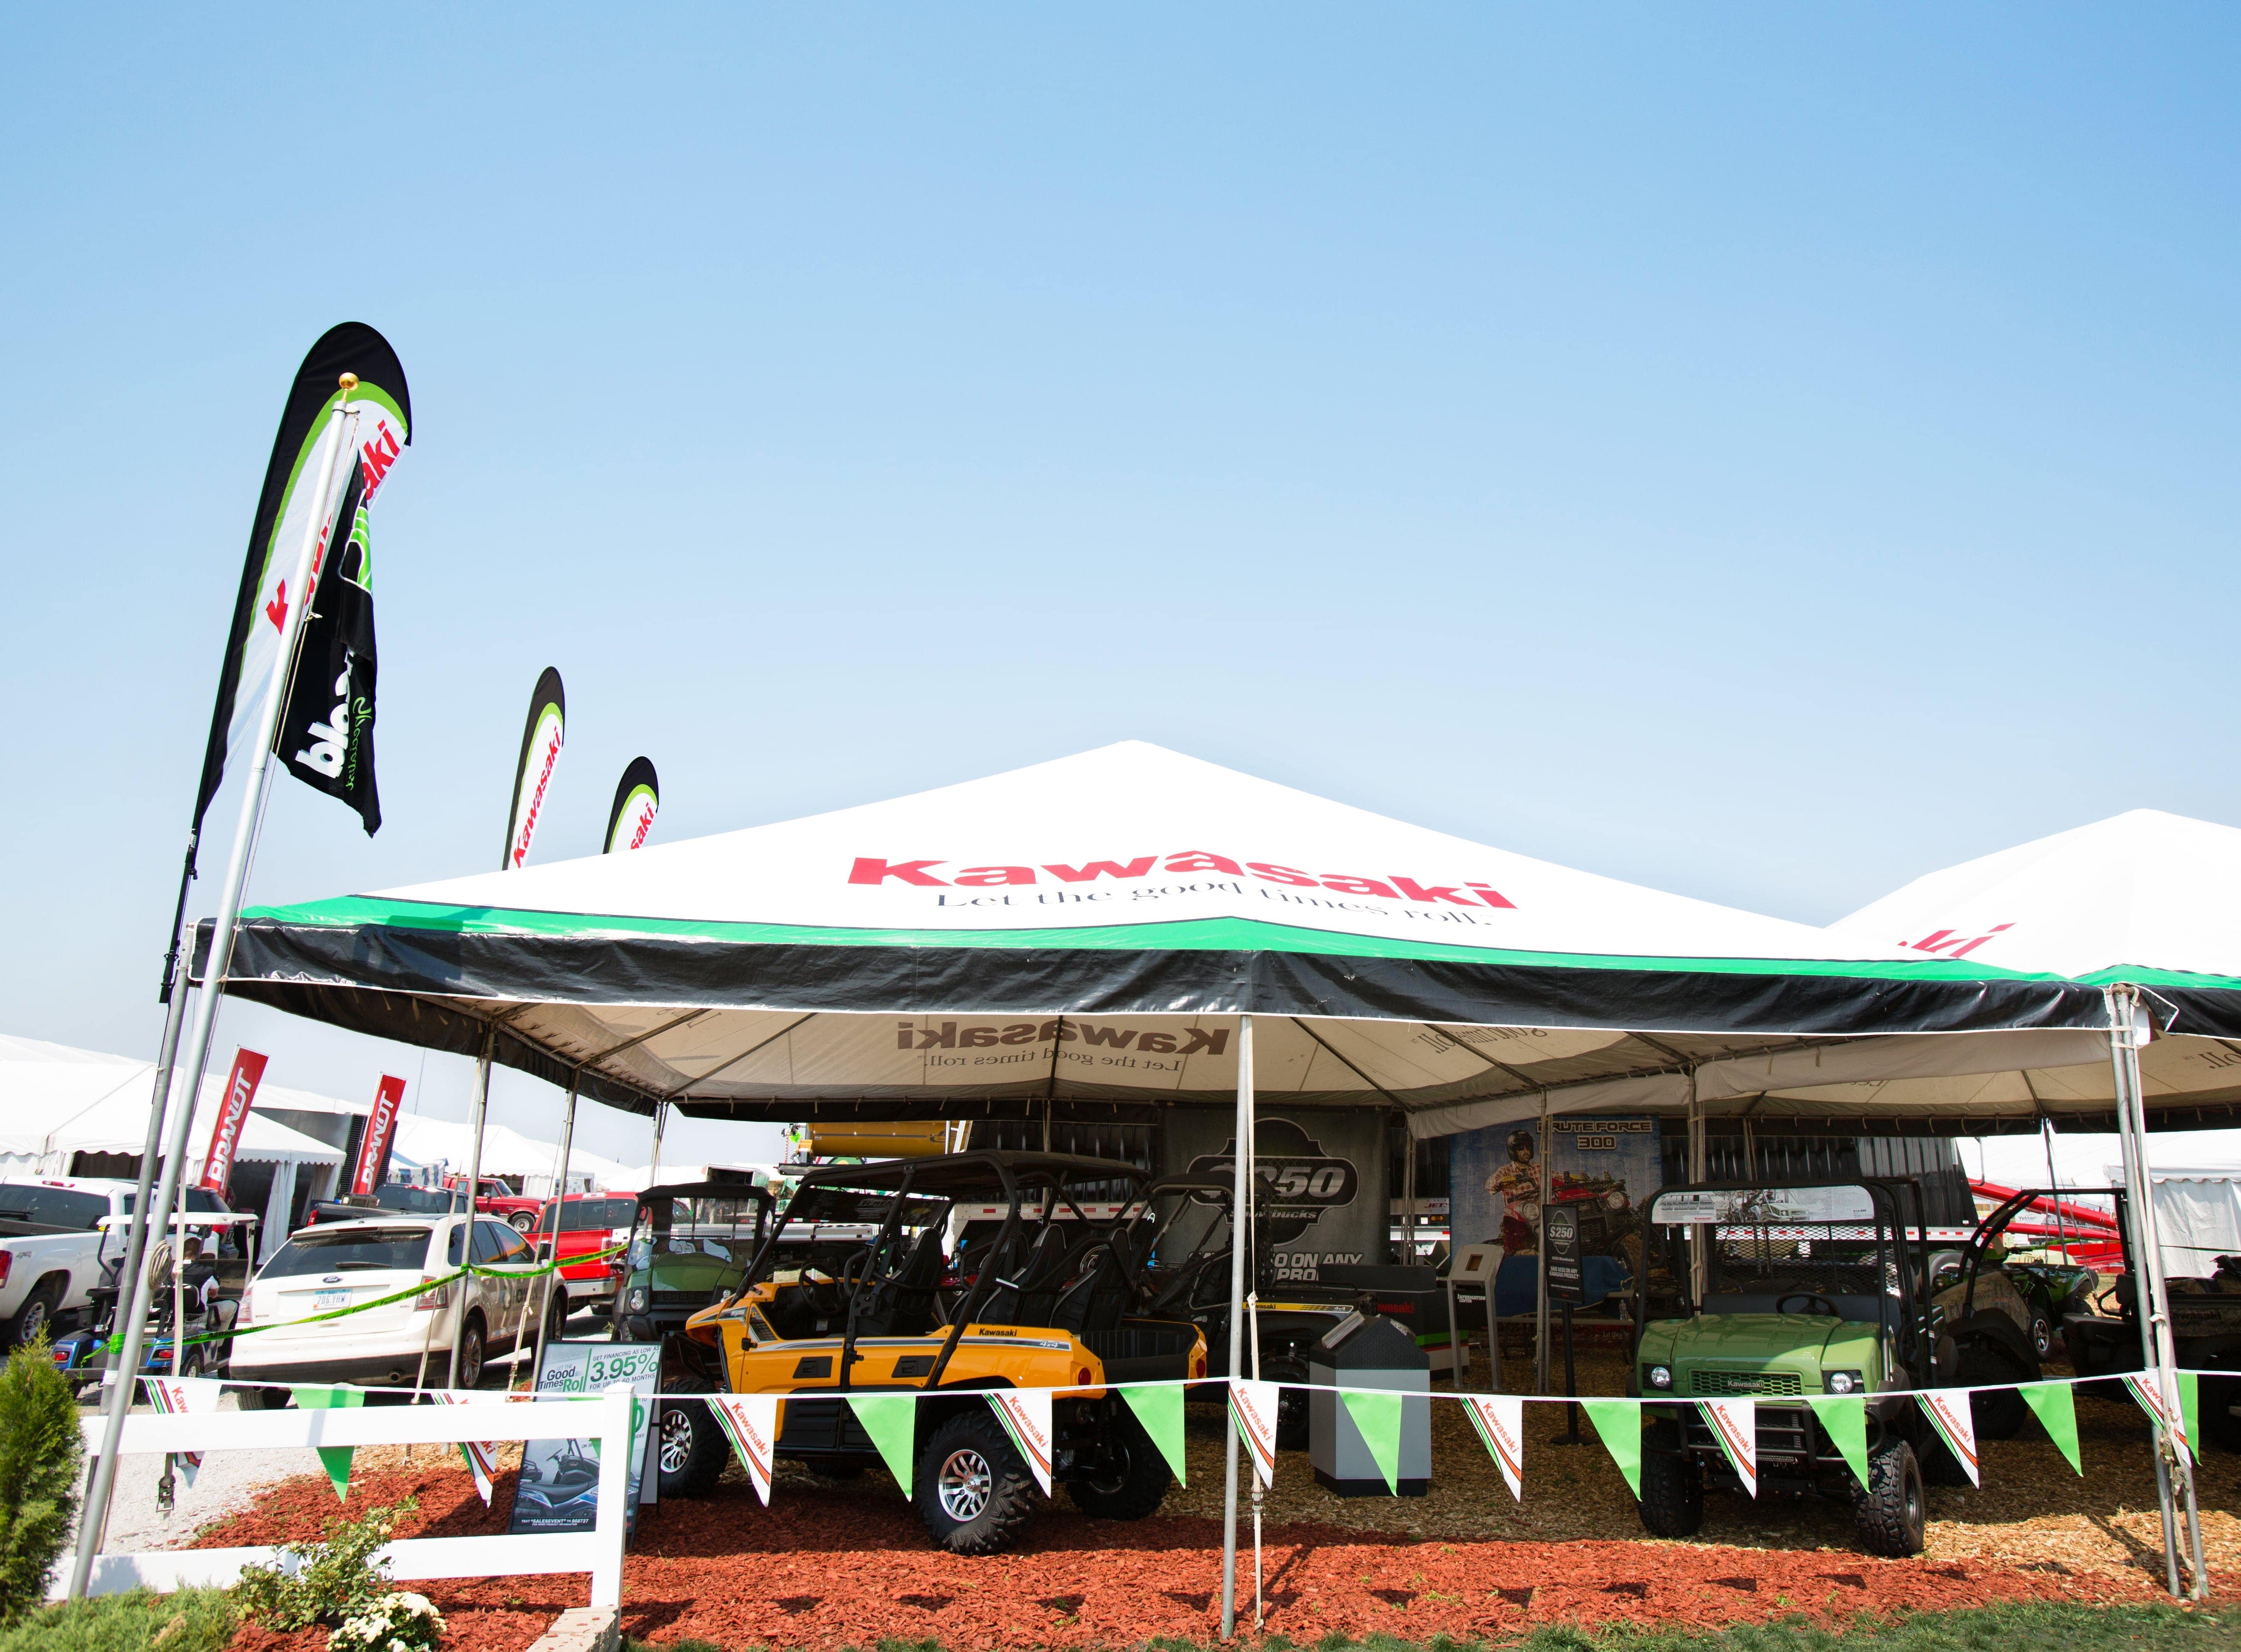 Using Branded Event Tents and Signage at Trade Shows - American Pavilion